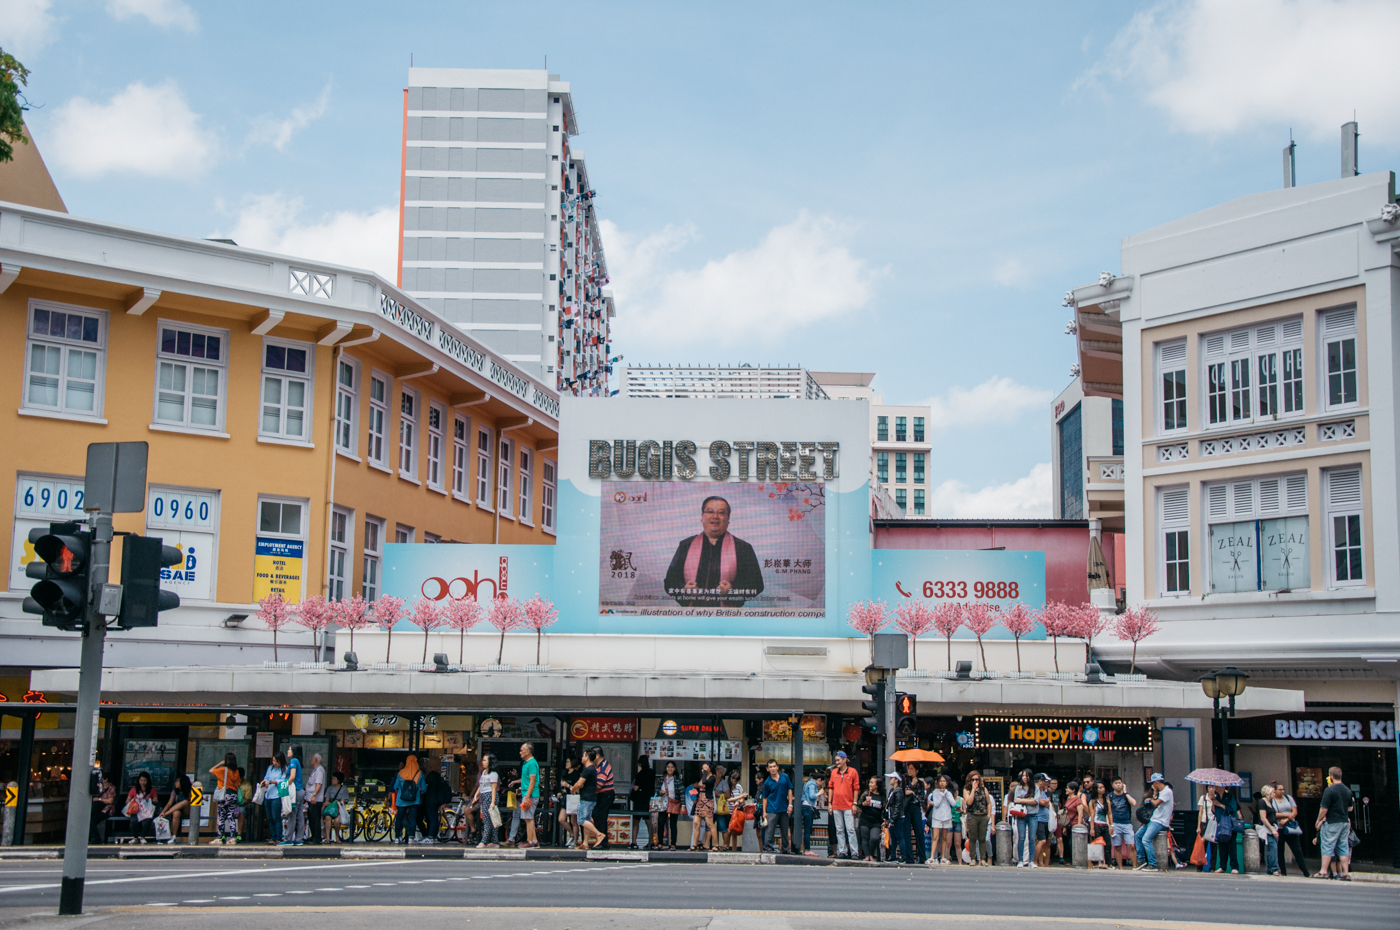 Shopping on a budget in Bugis Street